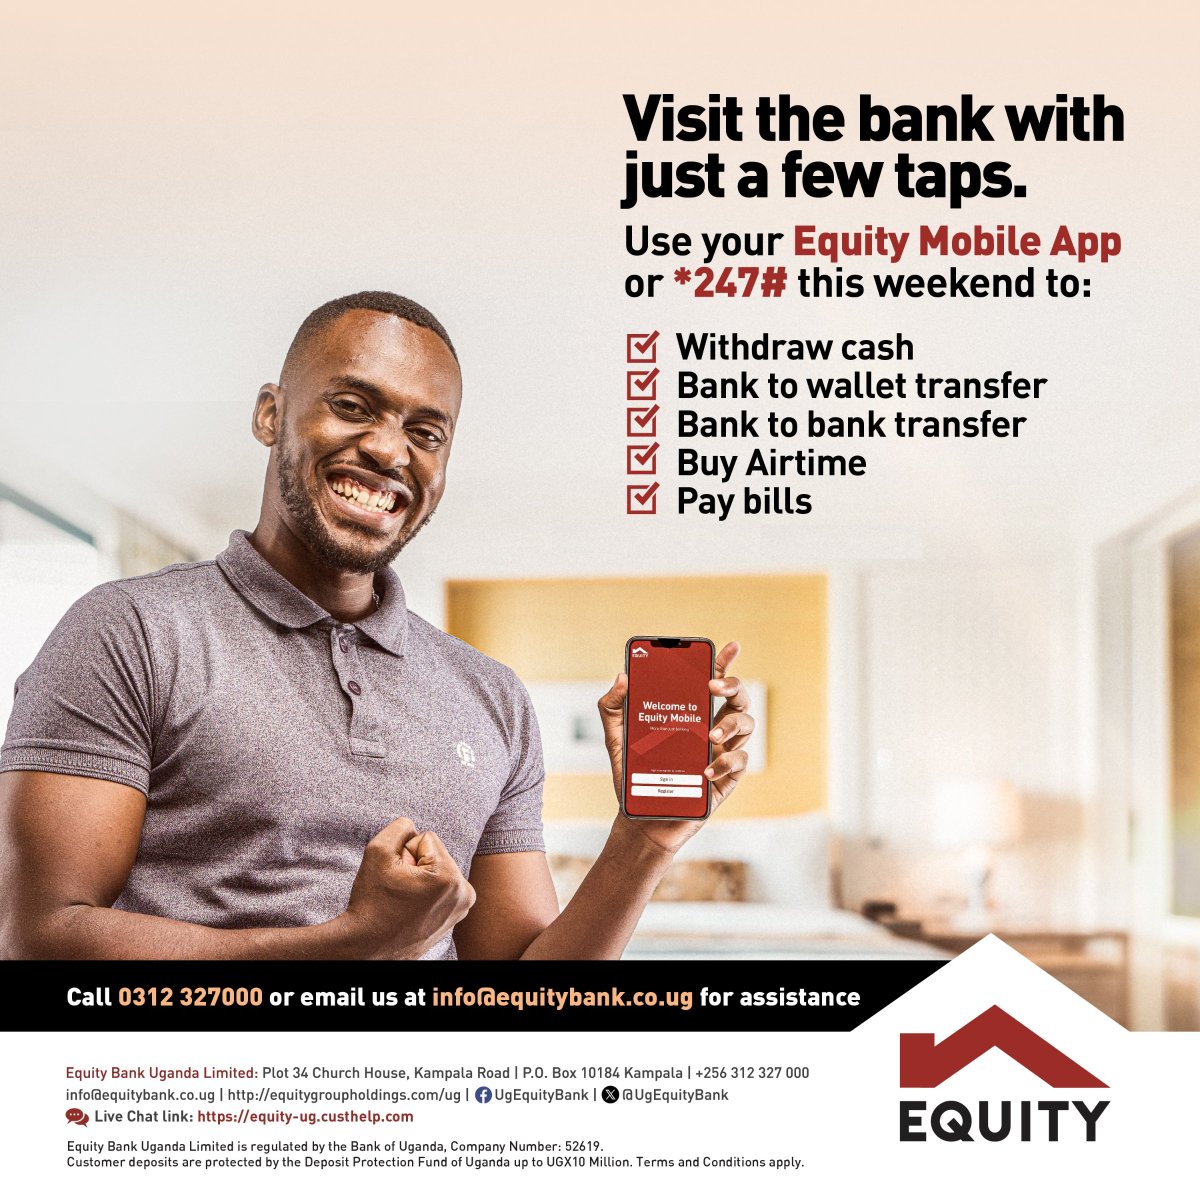 Whether it's chilling at the beach with friends or lounging on the sofa, you can now make quick & easy transactions at your fingertips with our digital banking platforms. #EquityMobile #Equity247